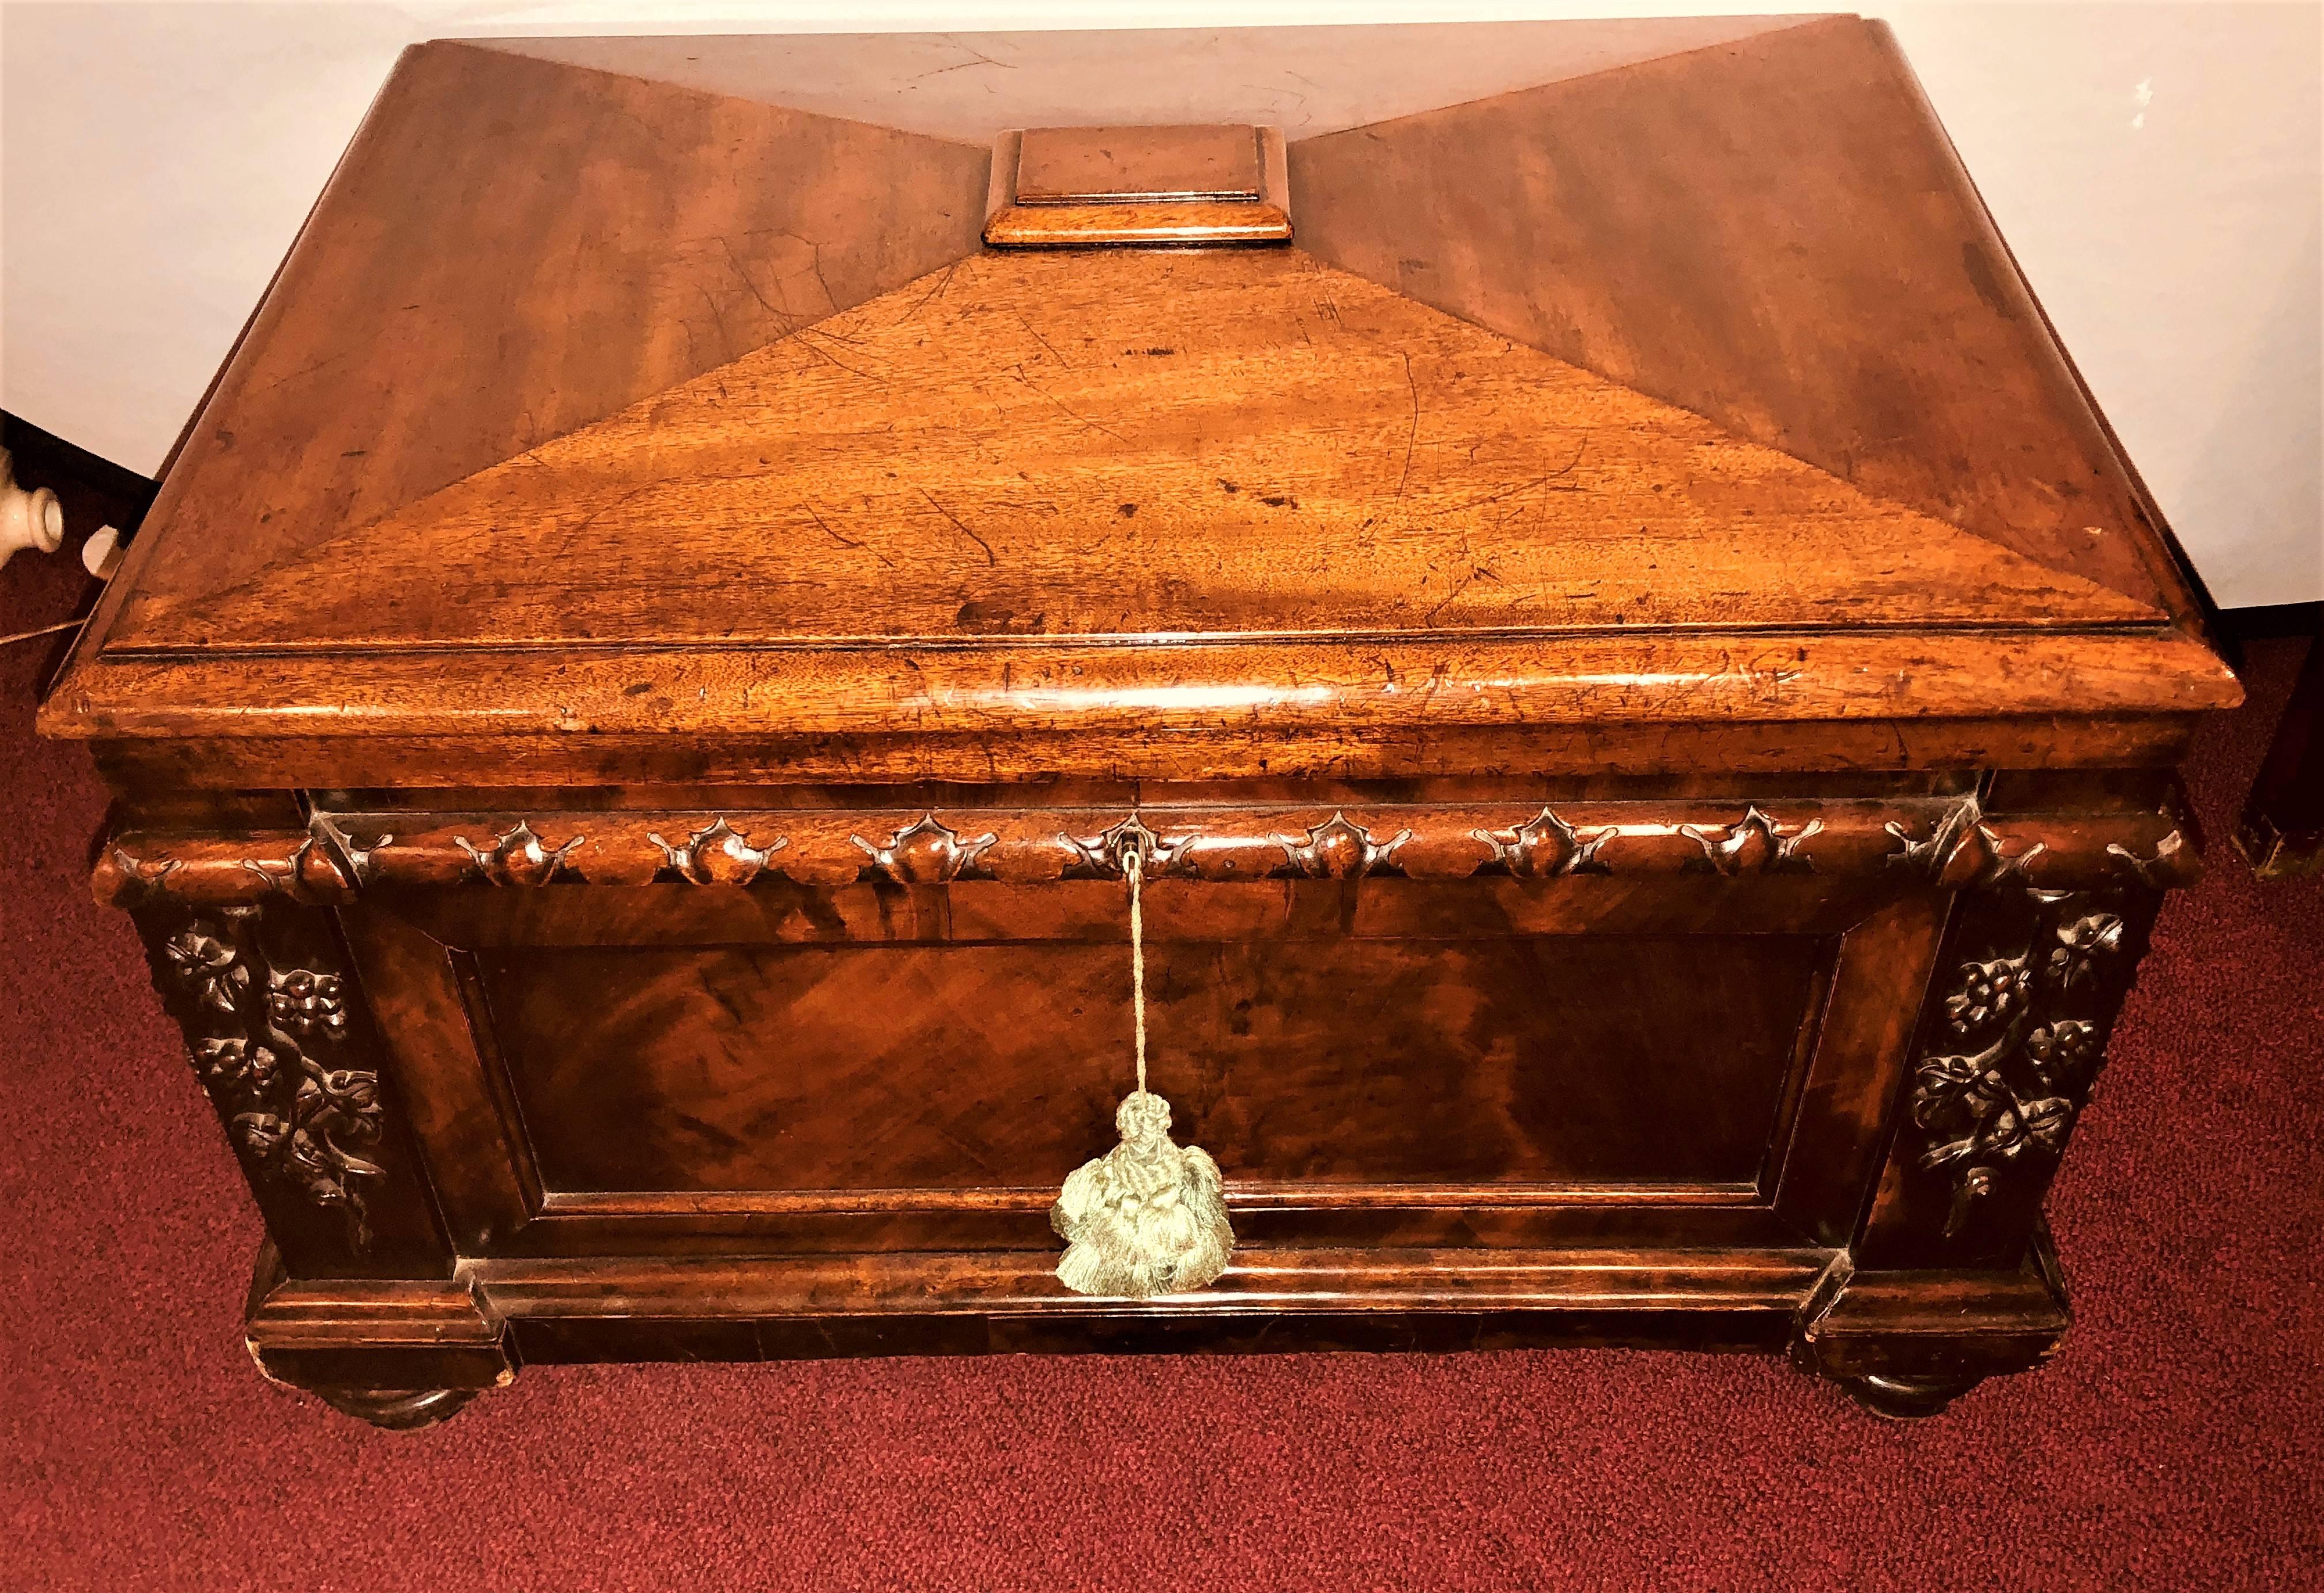 A 19th century rosewood Rococo carved wine cooler that can be used dowry chest. The strong and sturdy case having wonderful carvings of grapes throughout. The interior lead lined. 